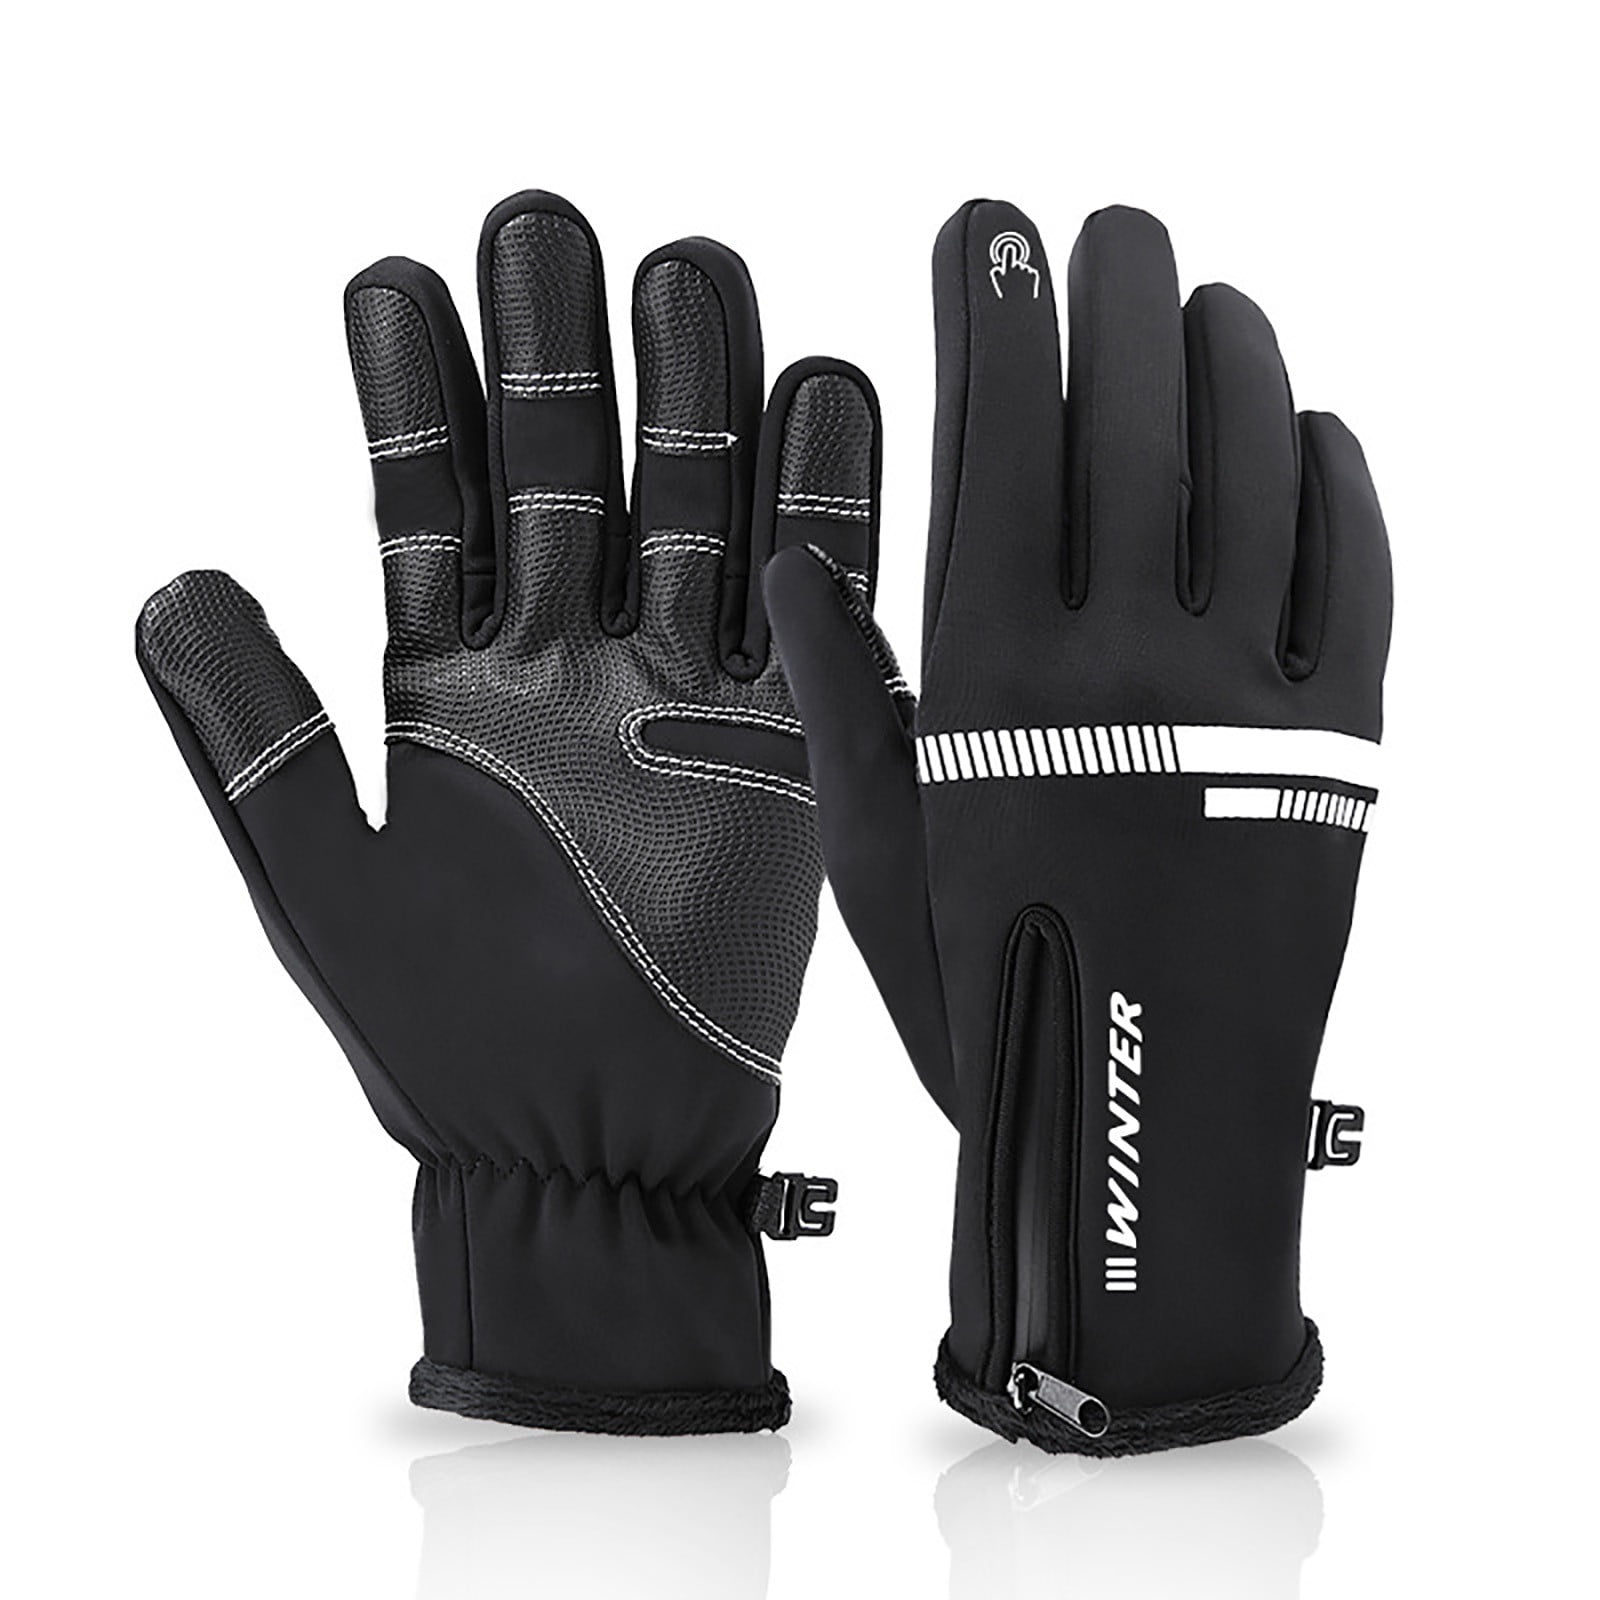 1 Pair Blue Black Ski Snowboard Gloves Waterproof and Windproof Thicken Gloves Unisex Breathable Lined Cotton Gloves for Winter Riding Biking Driving and Other Outdoor Activities